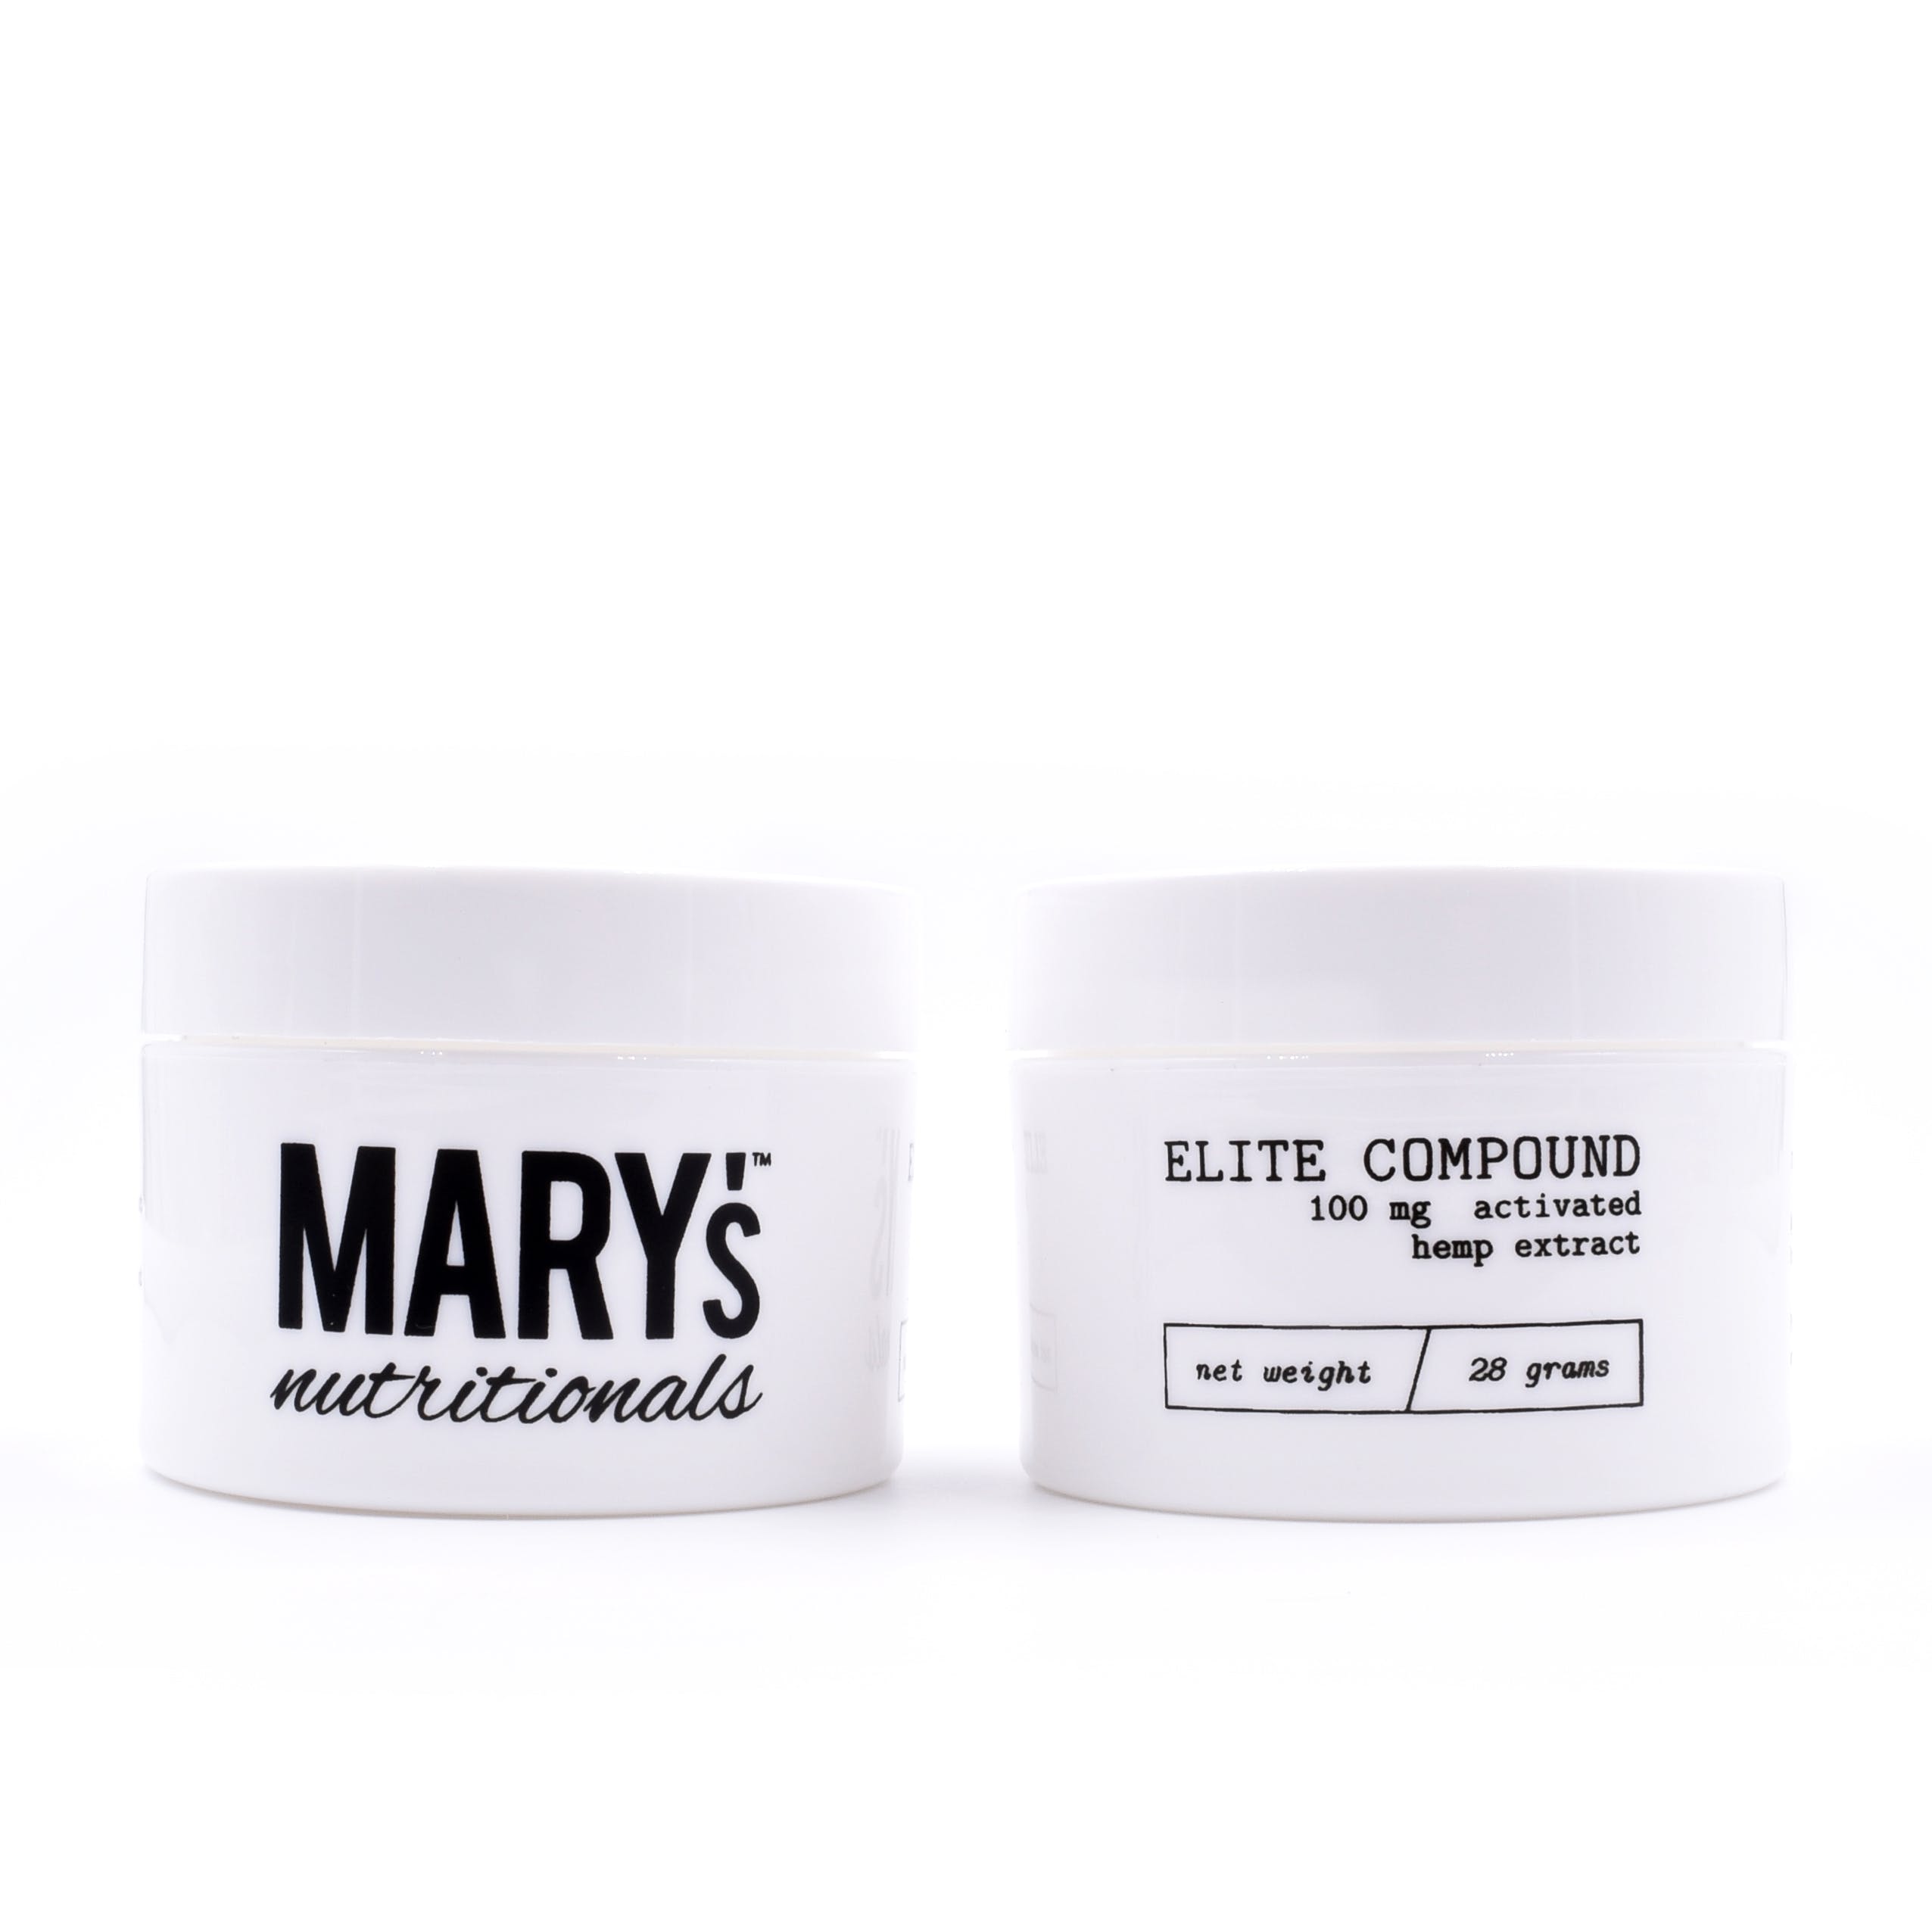 Ointment - Mary's Nutritionals Elite CBD Compound